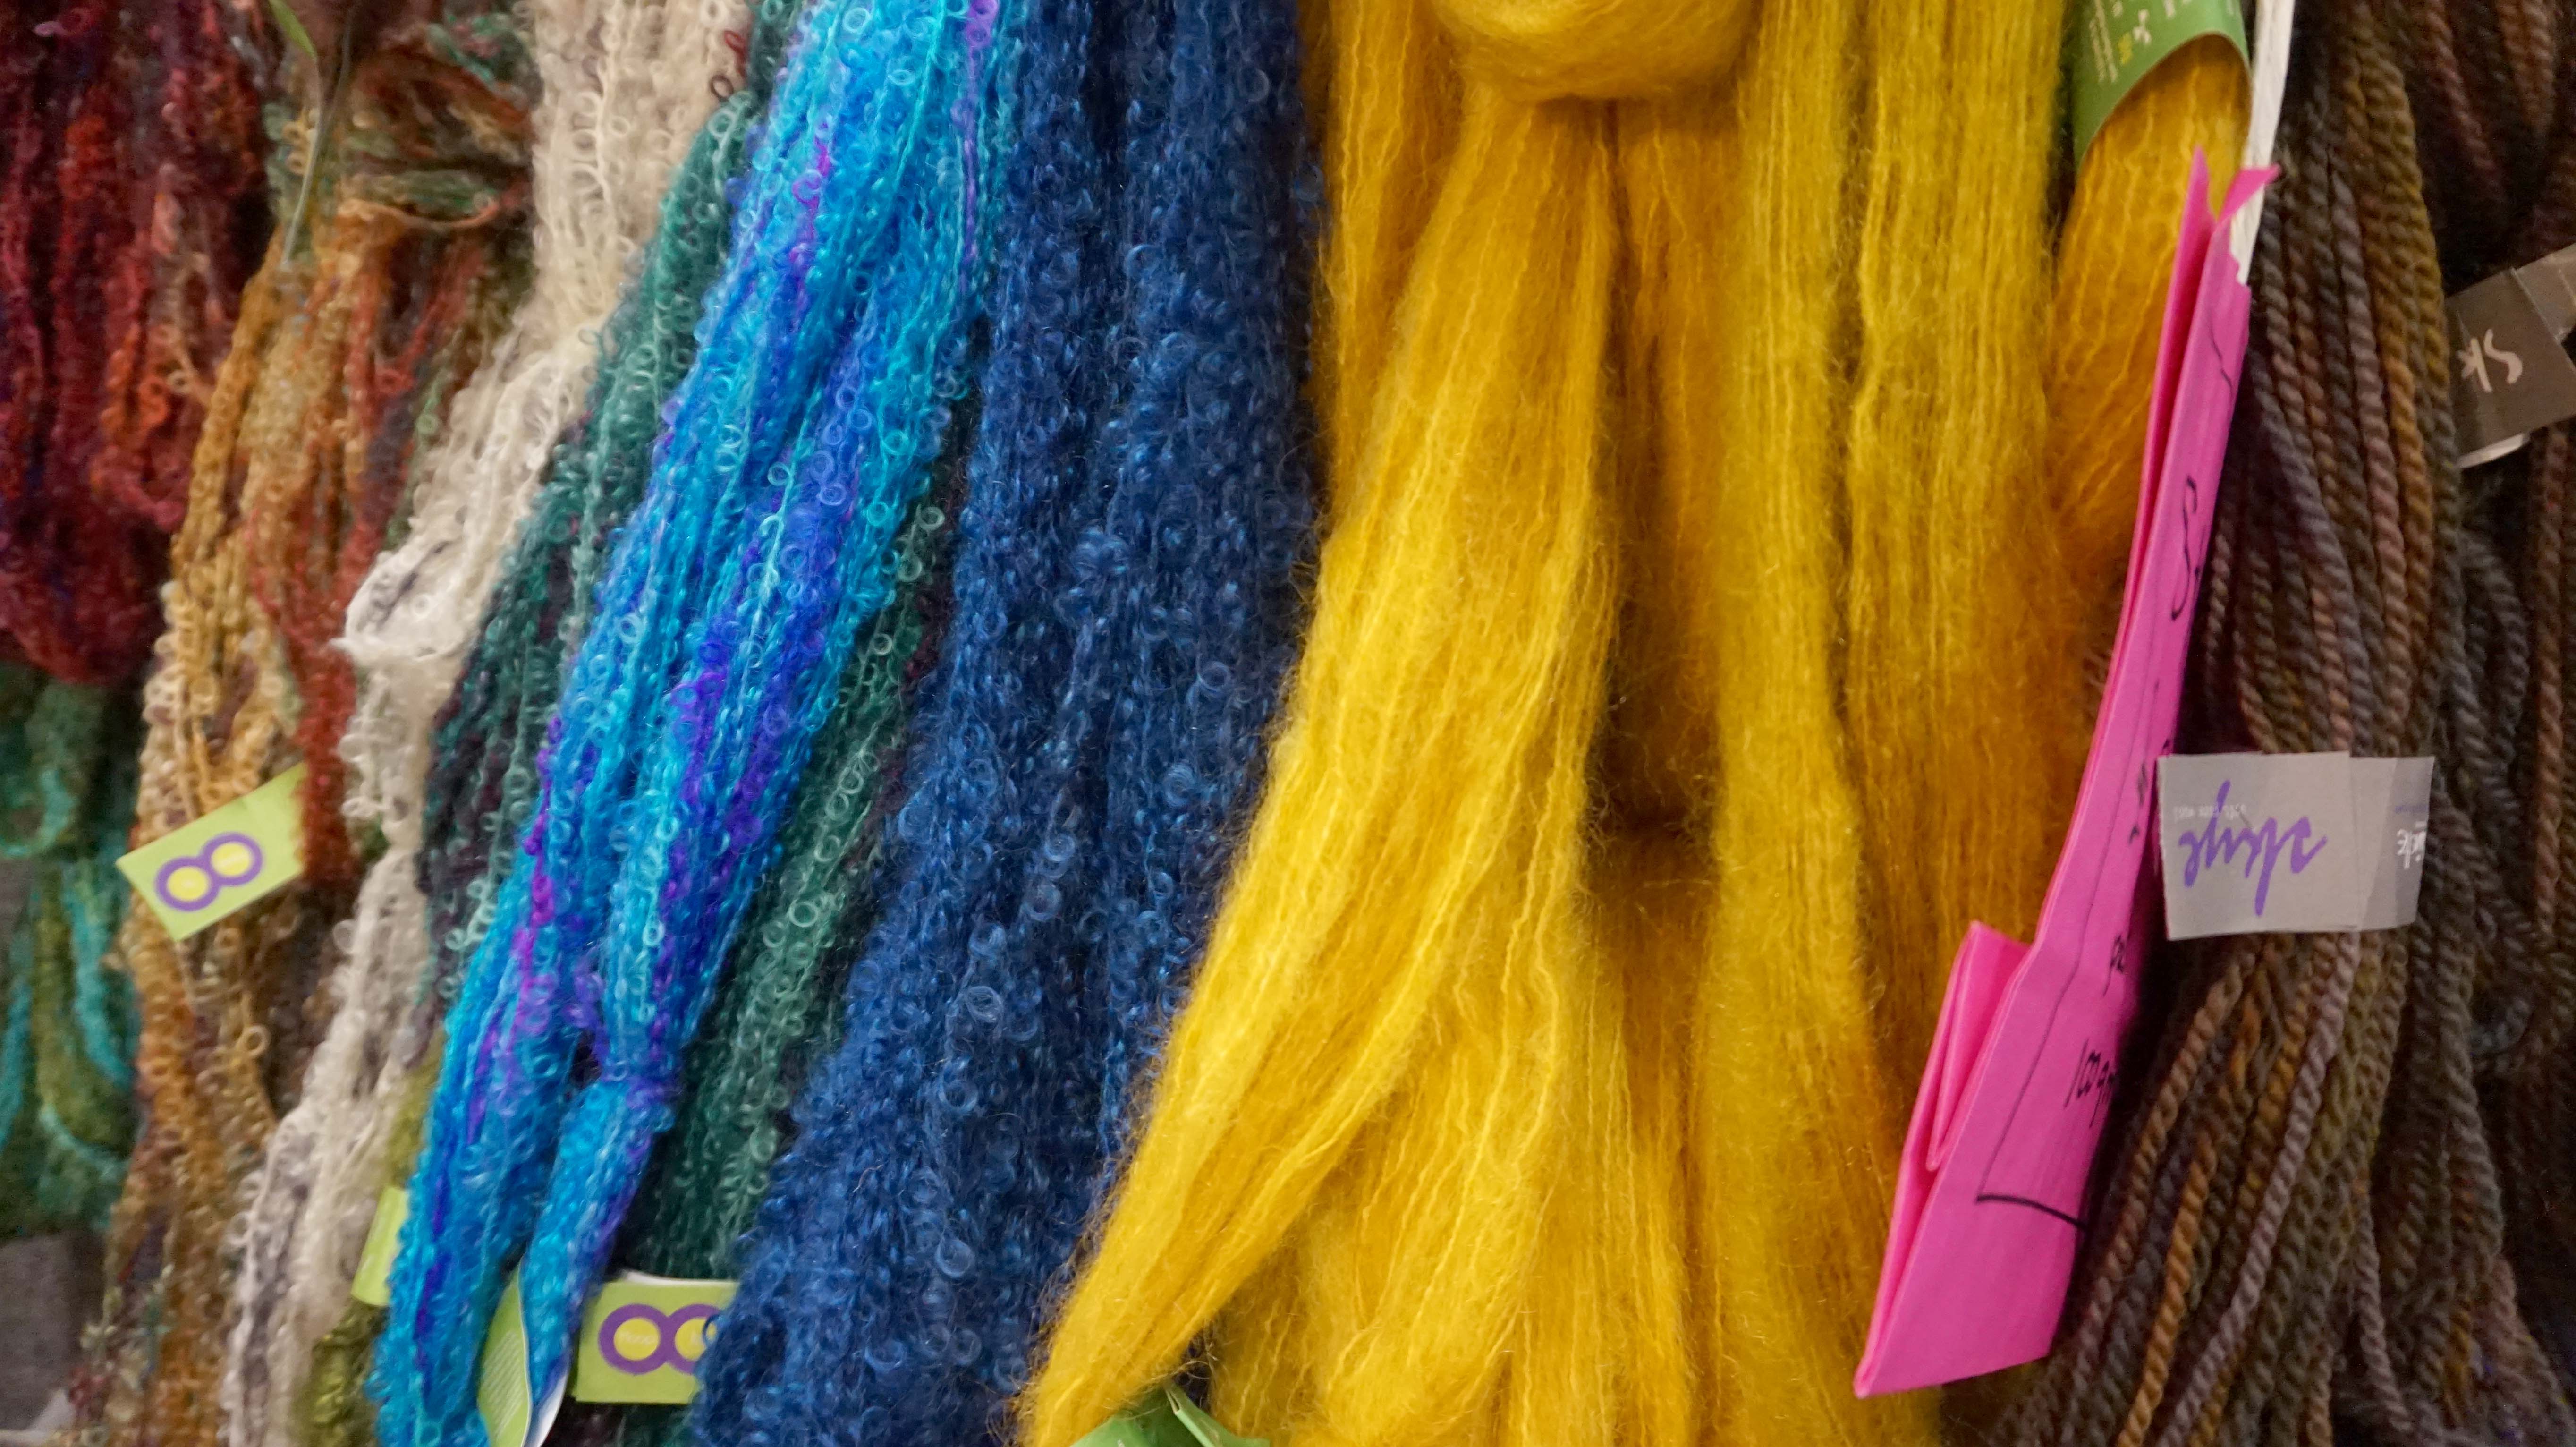 Yellow and Blue Colinette Yarns at Alexandra Palace